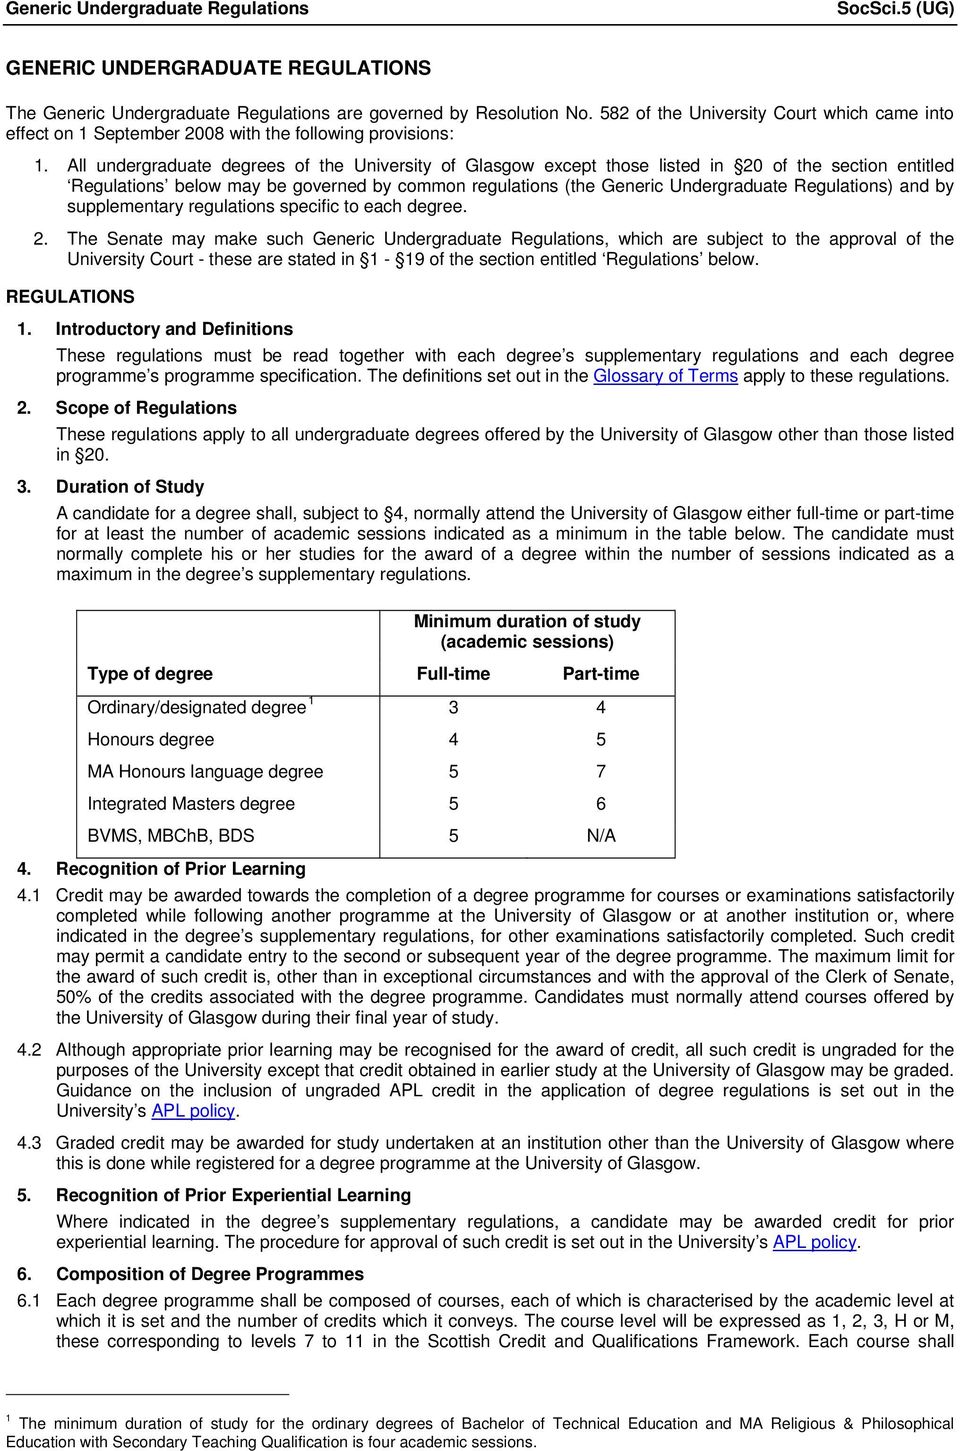 All undergraduate degrees of the University of Glasgow except those listed in 20 of the section entitled Regulations below may be governed by common regulations (the Generic Undergraduate